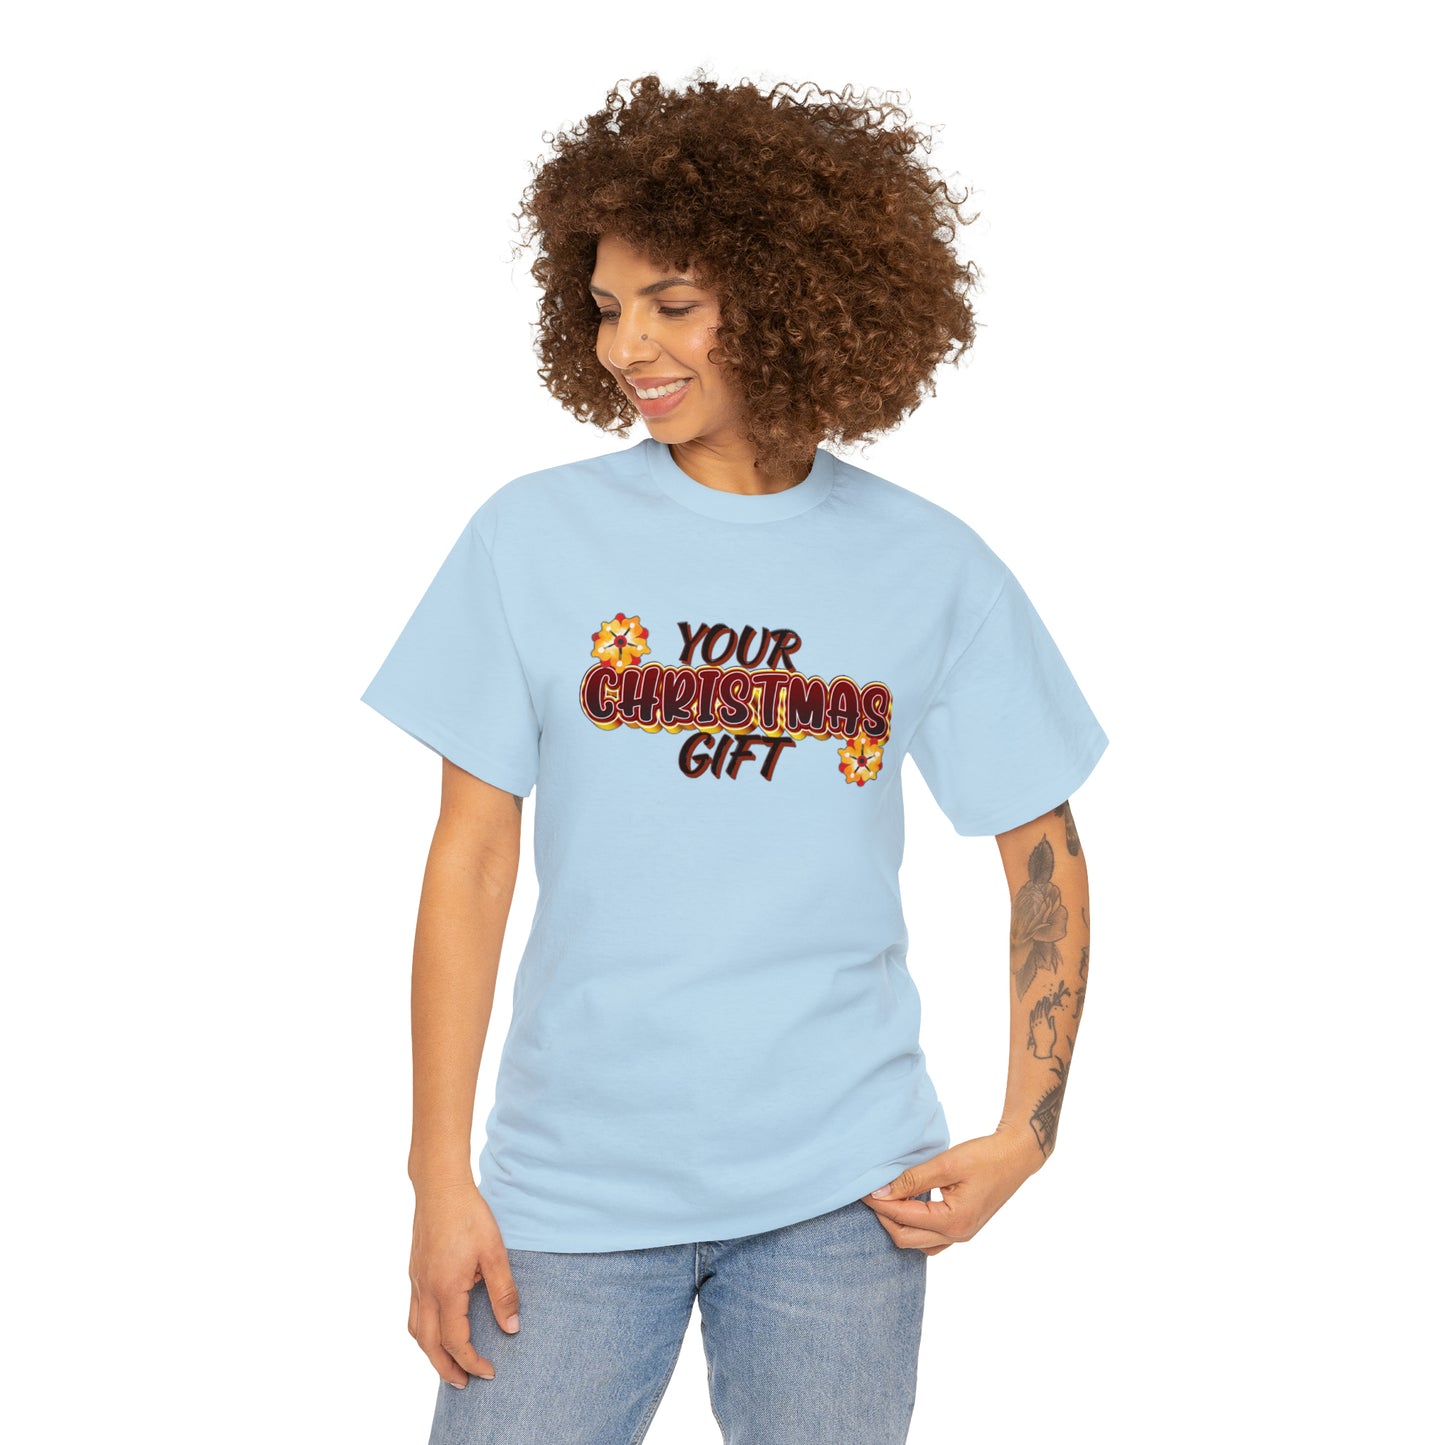 Your Christmas Gift - Heavy Cotton Tee for Men and Women